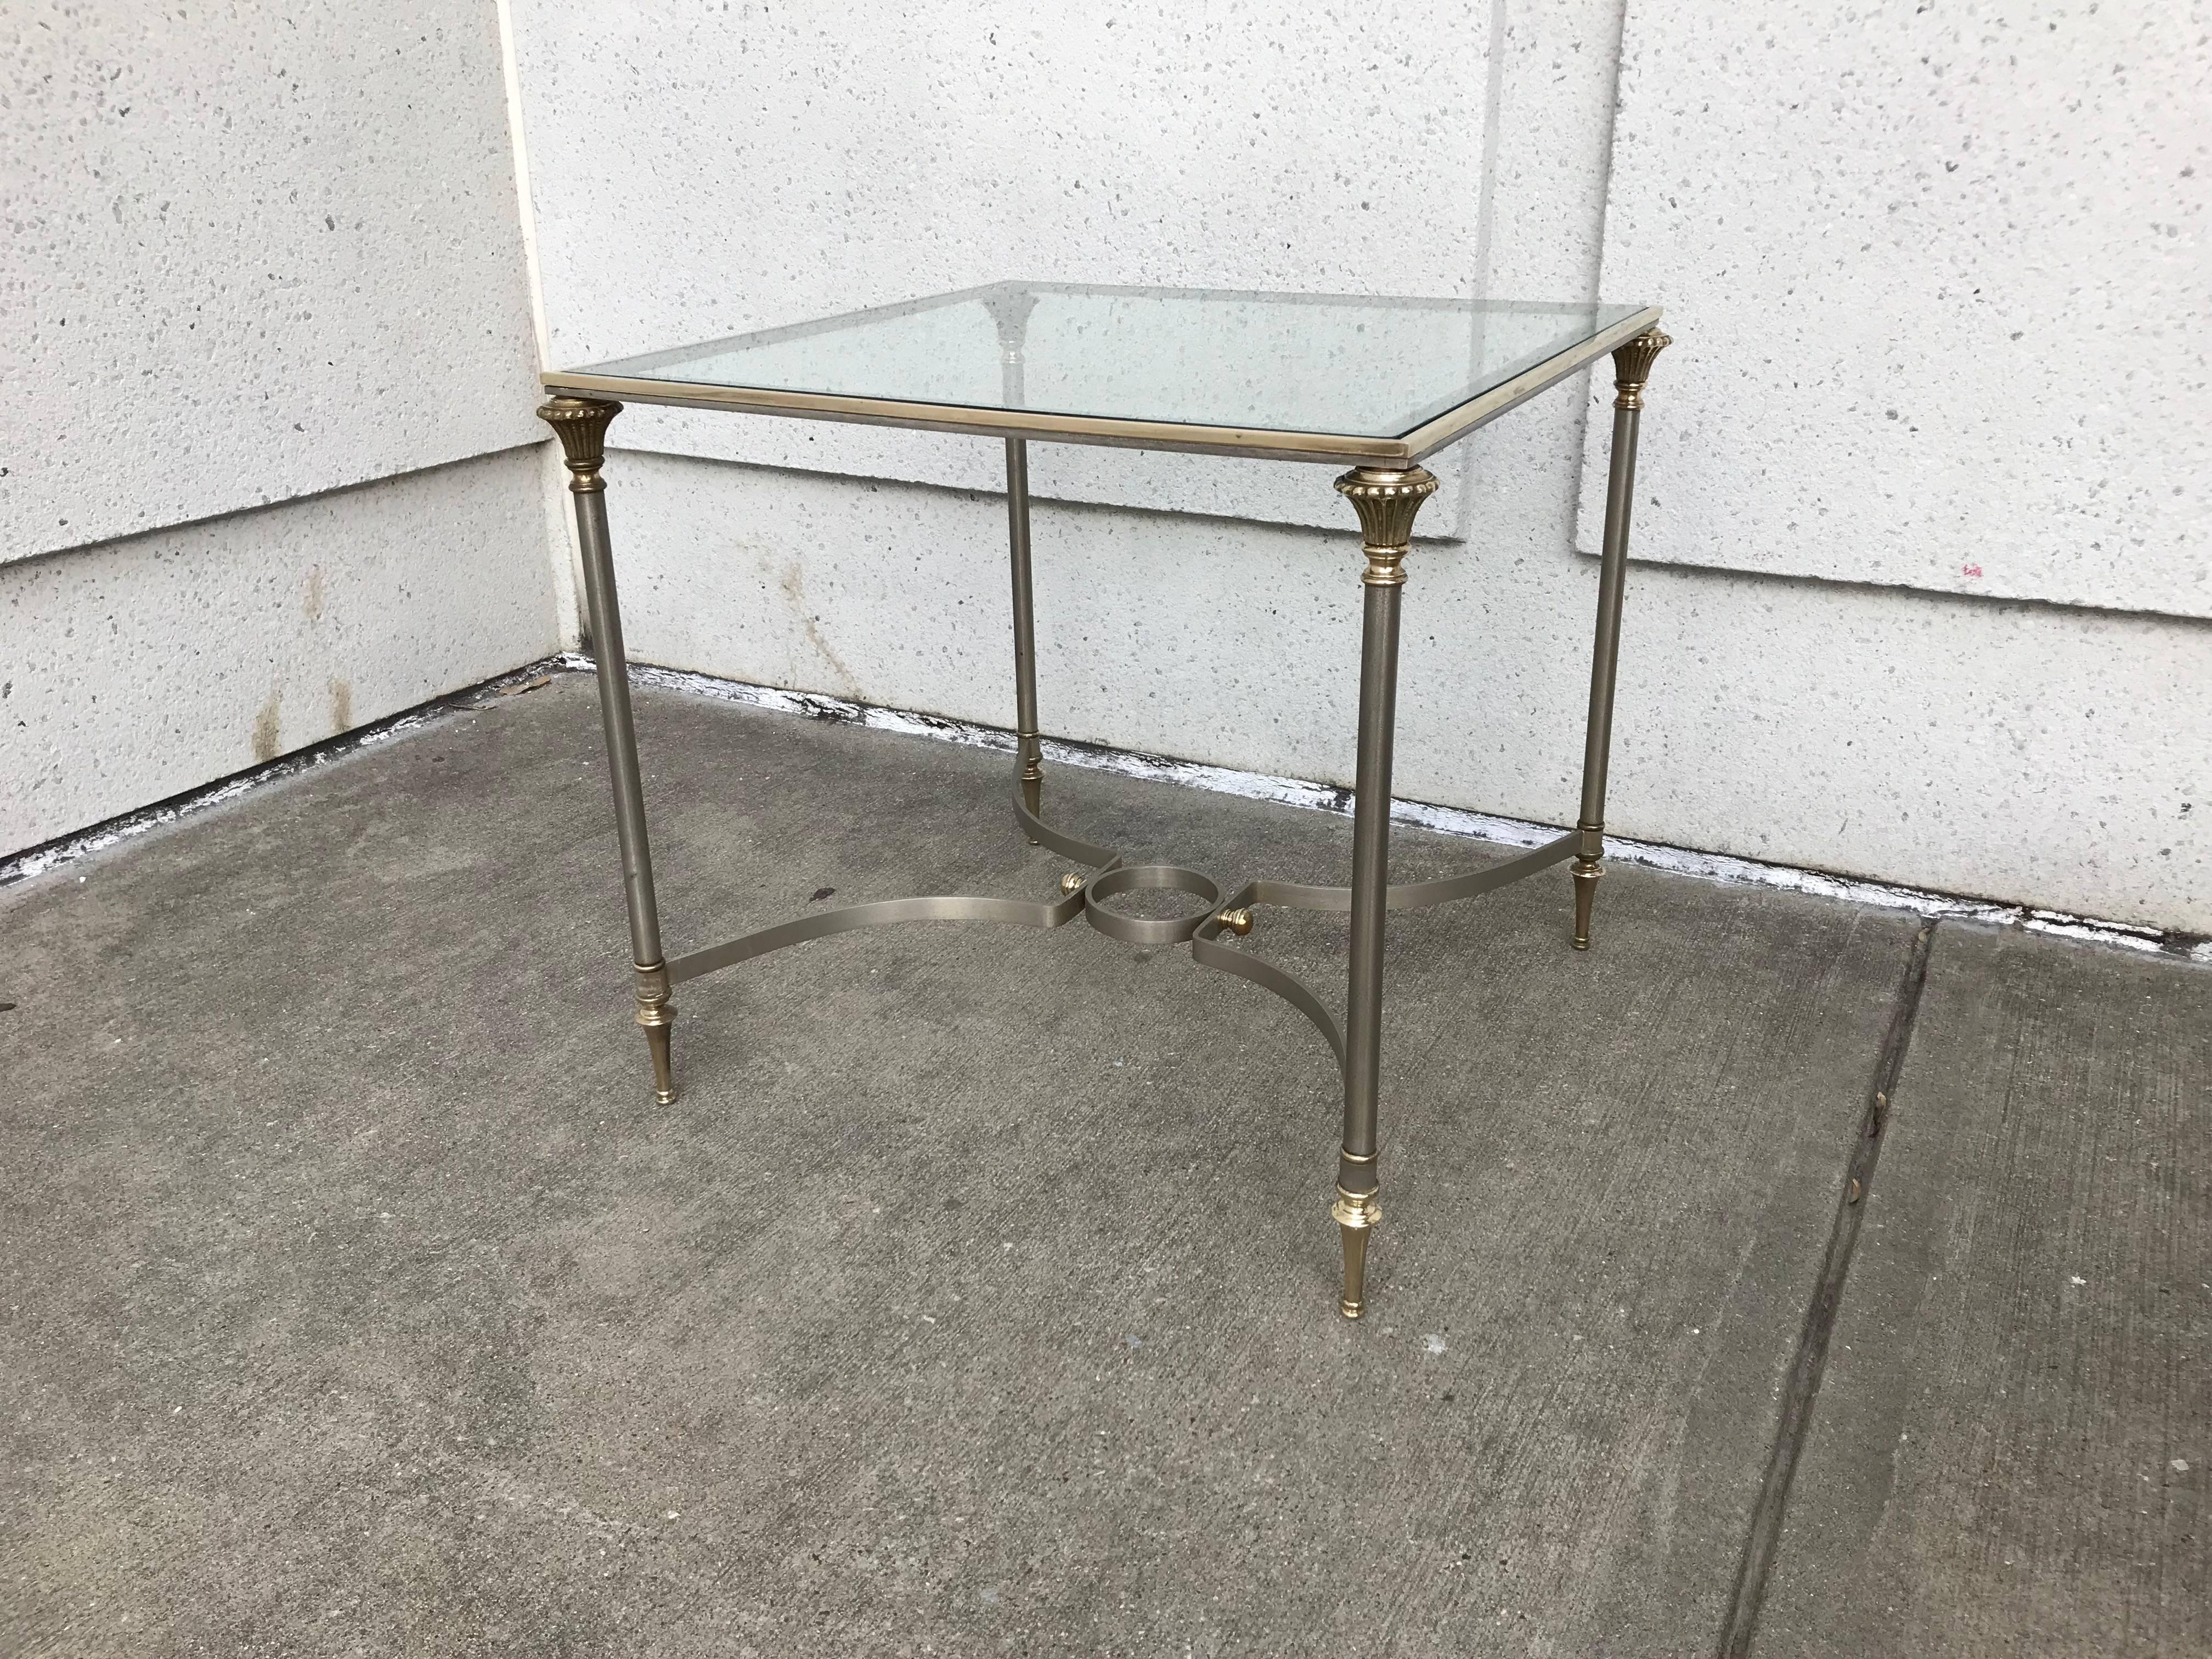 A handsome Italian made Maison Jansen style brushed steel and bronze side table in the neoclassical style. Beautifully crafted with steel legs over bronze trumpet feet topped by fluted capitals. The X-stretchers joined in the center by a circle,